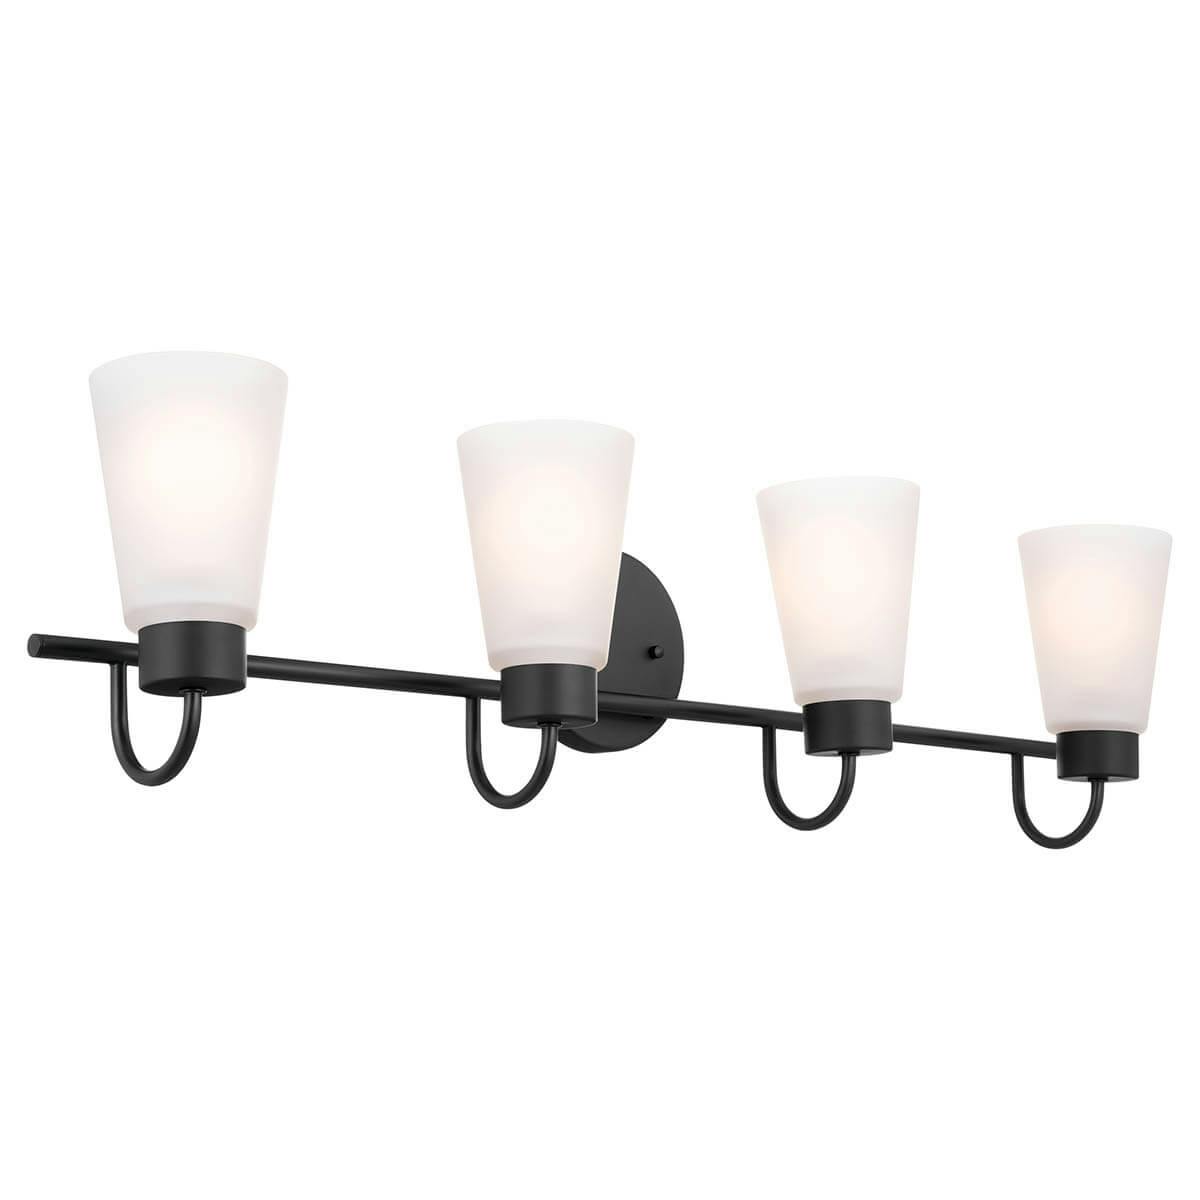 The Erma 28" 4 Light Vanity Light Black facing up on a white background